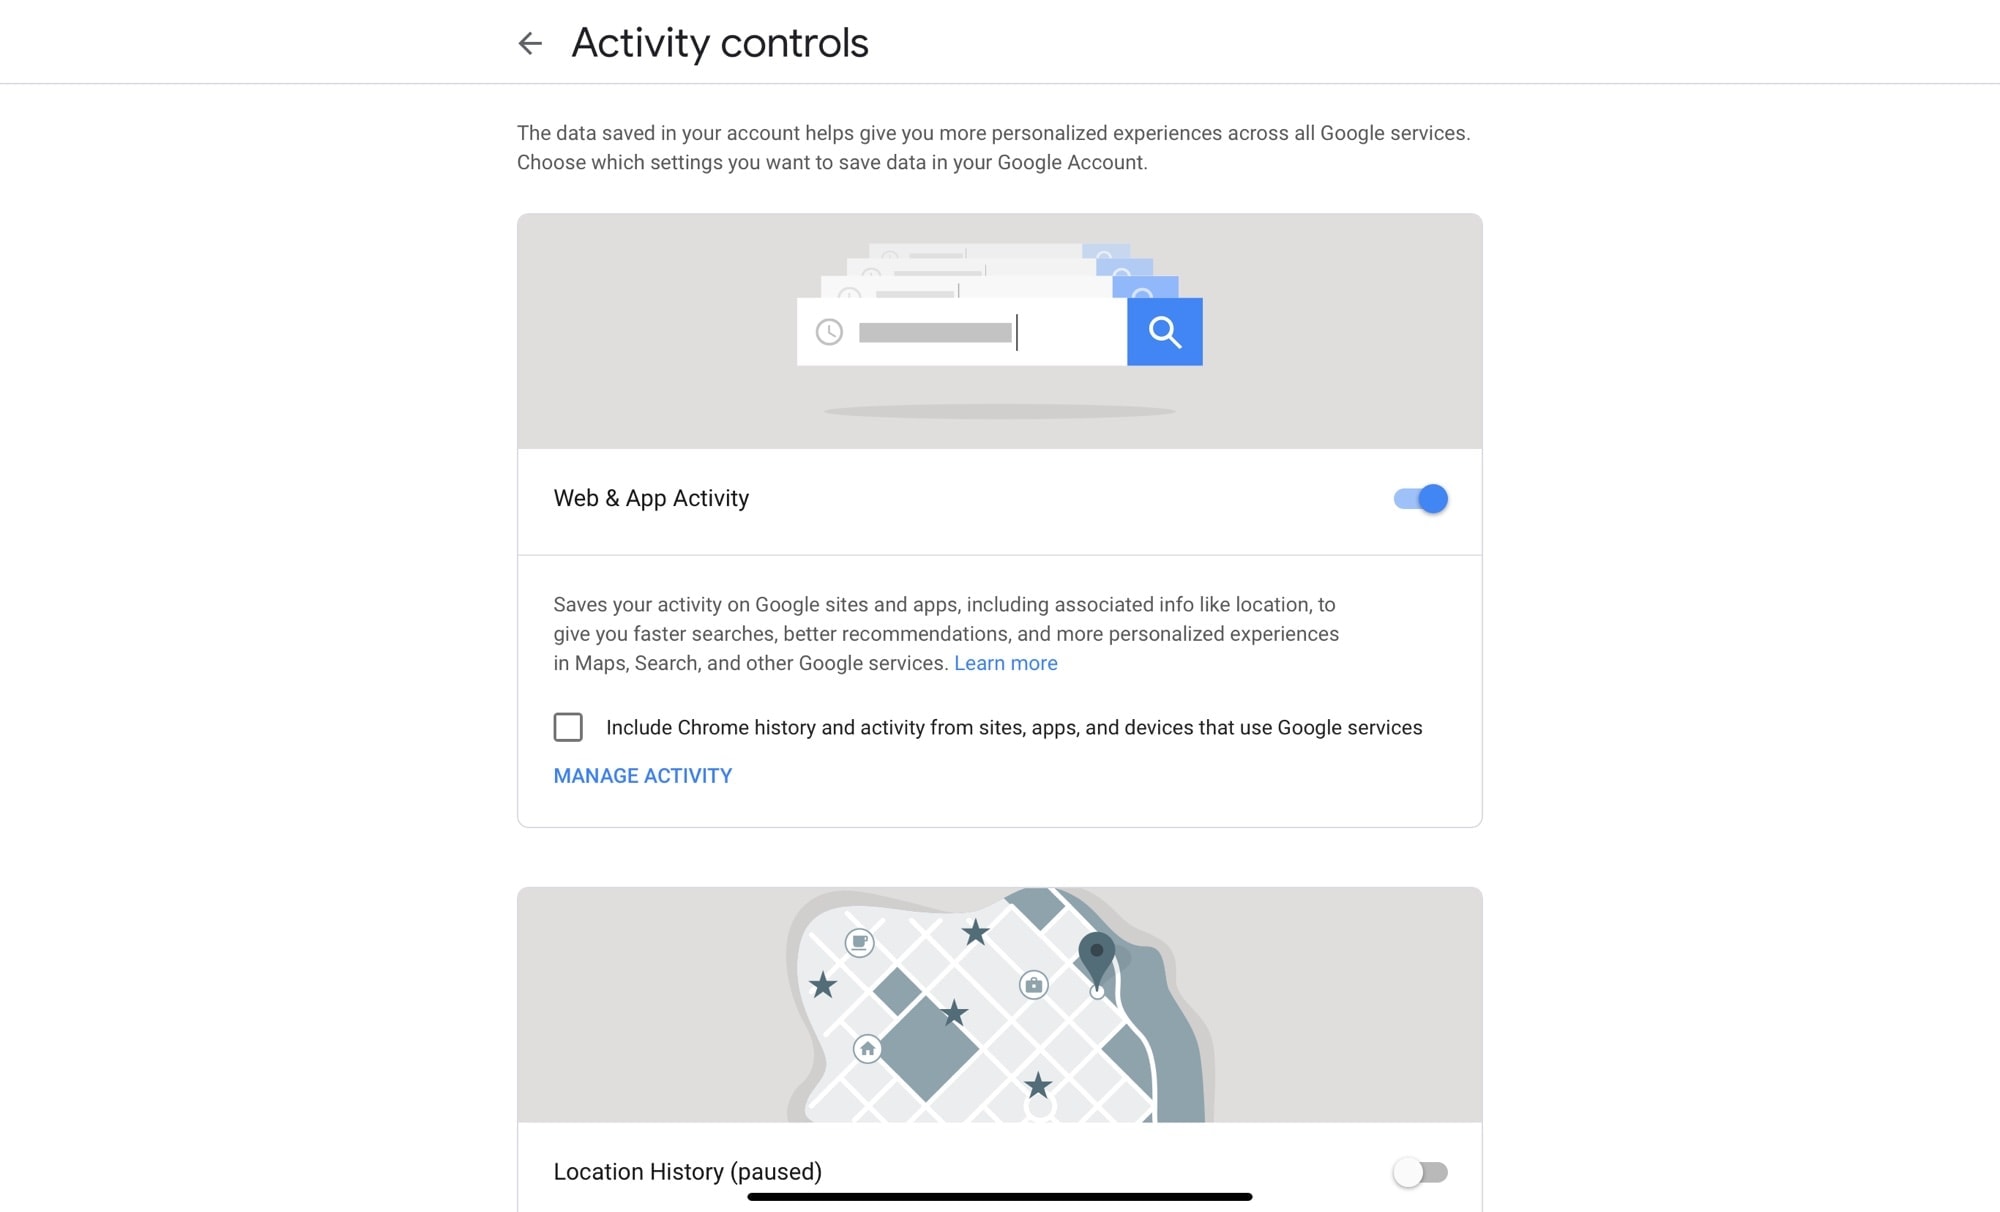 Switch everything off on the Google Activity Controls page.